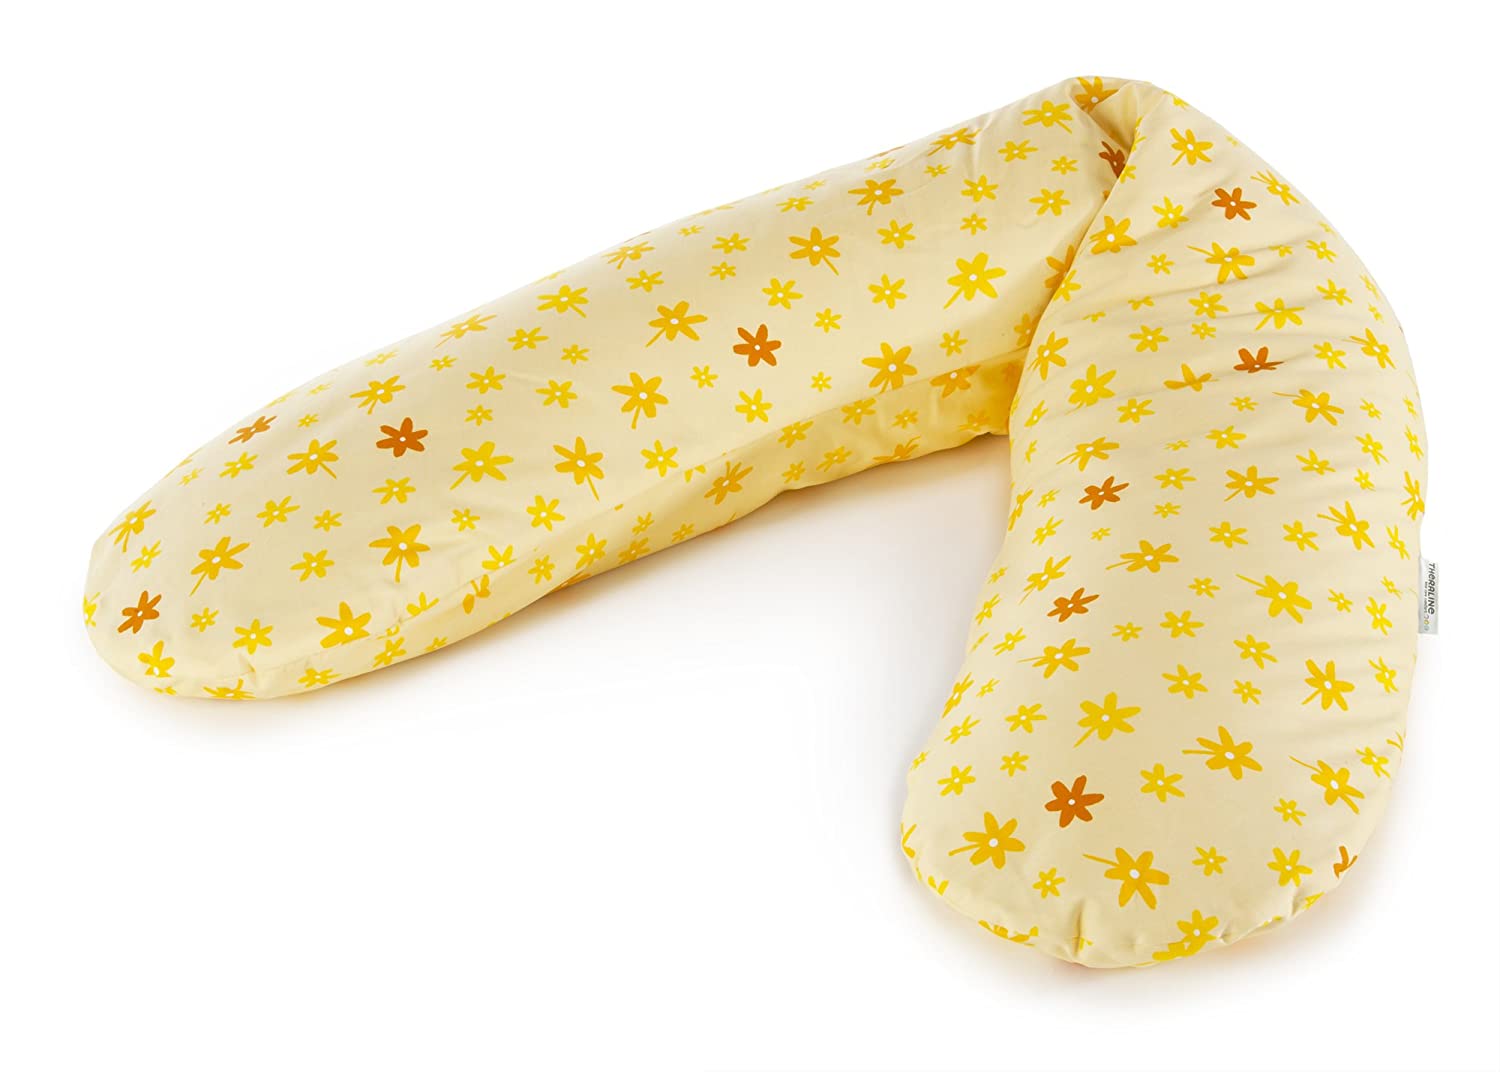 Replacement Cover For The Original Theraline Pregnancy And Nursing Pillow, 100% Cotton. yellow flowers